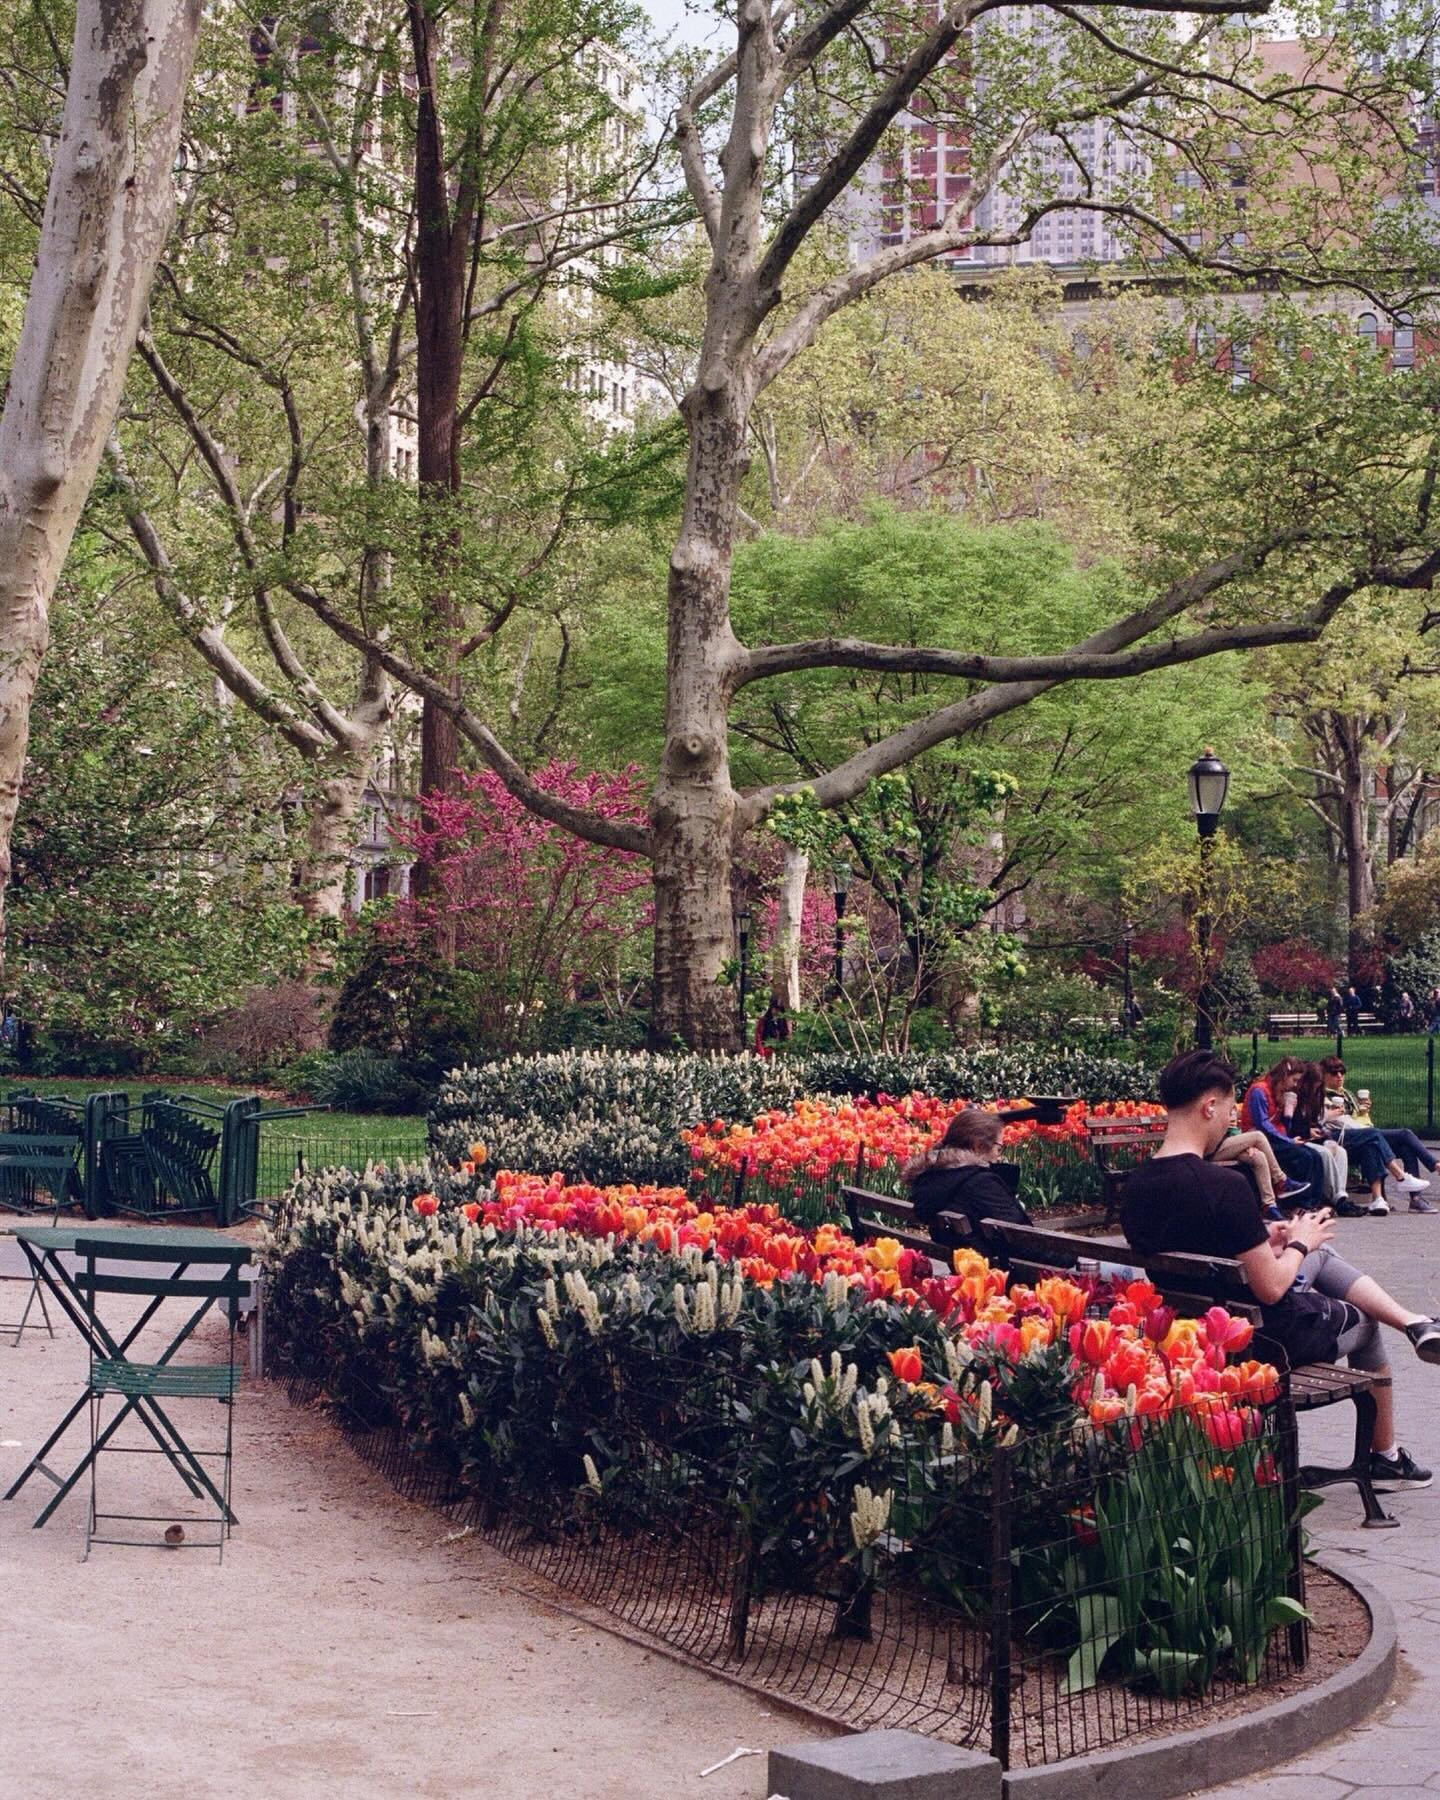 flower markets / pastel yellows / blooming tulips / a lush city / dancing trees / second cups of coffee / newspapers on stoops / gardens full of life &mdash; a spring roll of my dreams 🎞️🌷☕️

#nycfilm #springinnyc #nycweddingphotographer #westvilla